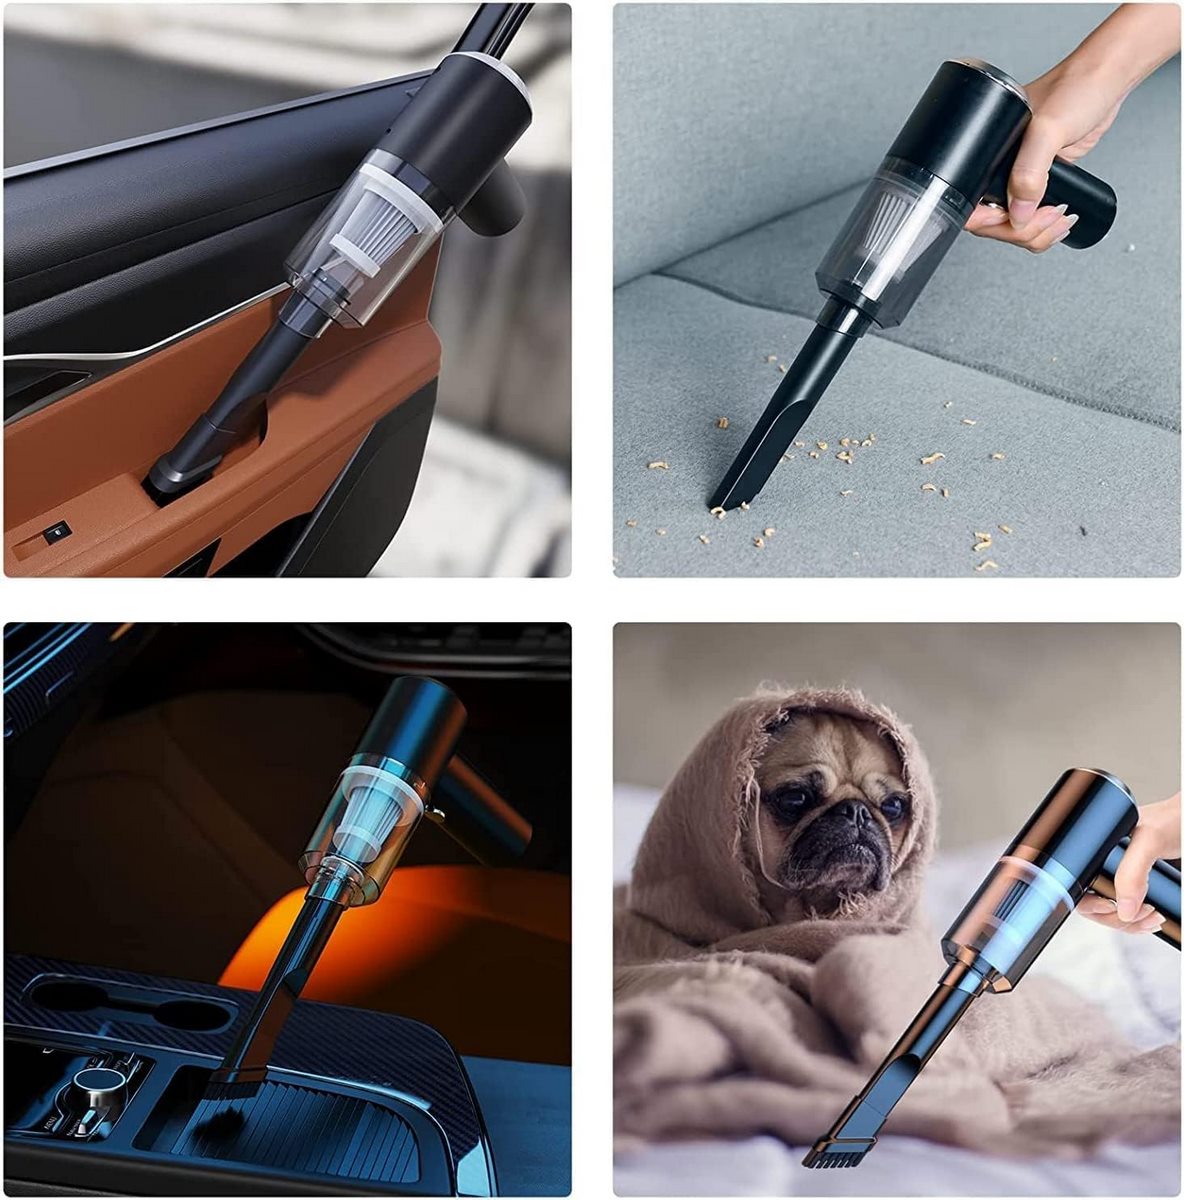 jags-mumbai Other material 2in1 Portable Mini Home and Car Vacuum Cleaner